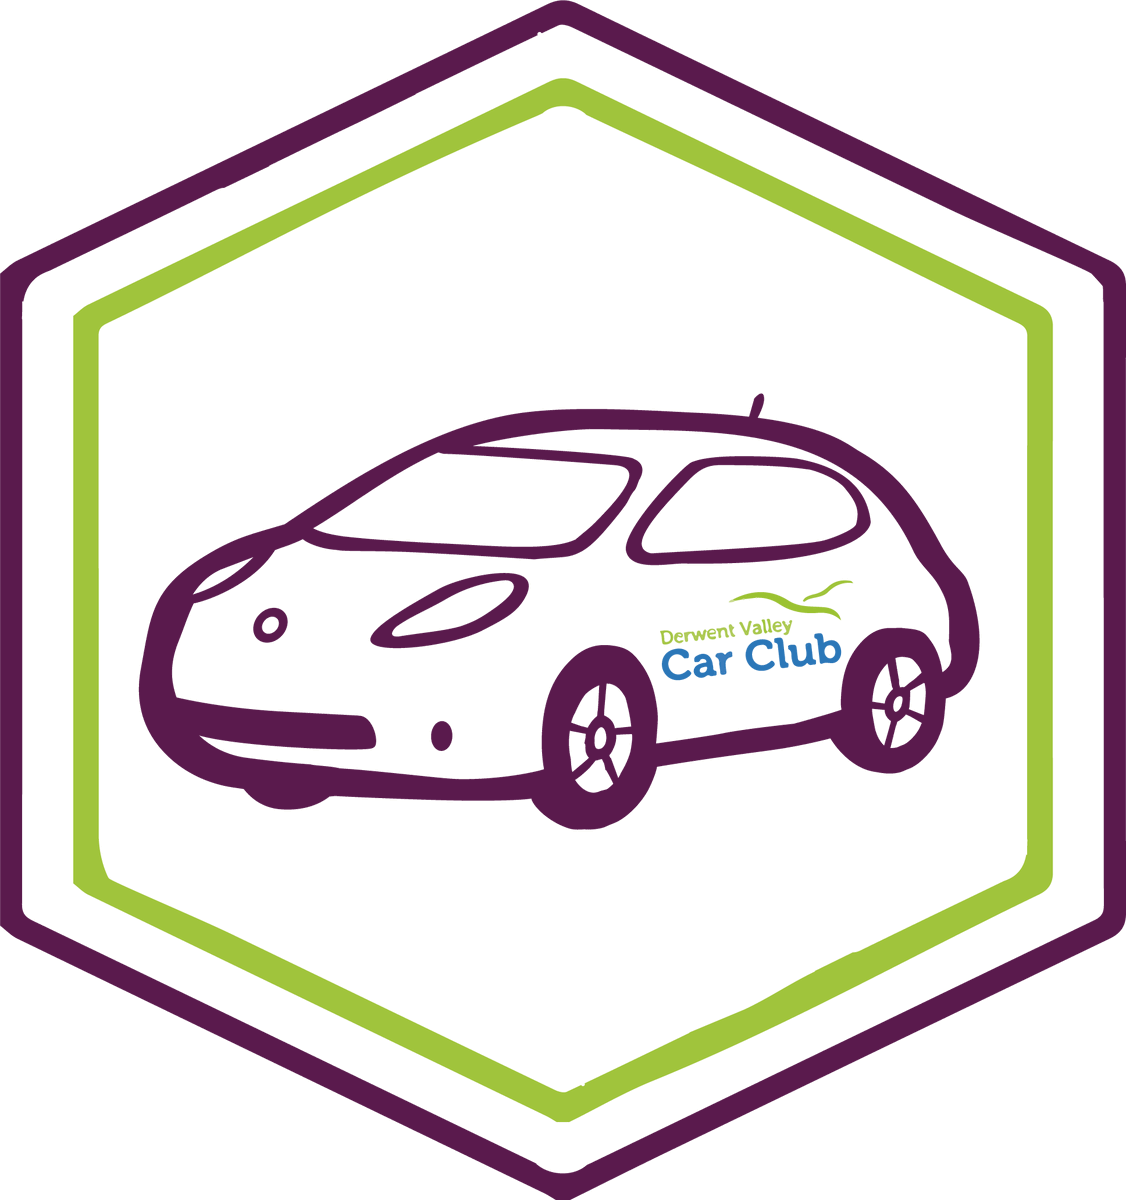 Rural car clubs can reduce transport costs, increase accessibility and help decarbonise. Car Club in a Box brings together all the policies, guidelines and technology community groups might need to set up a car club in their area. Find out more at ed-ge.uk/event/car-club… #TRIG